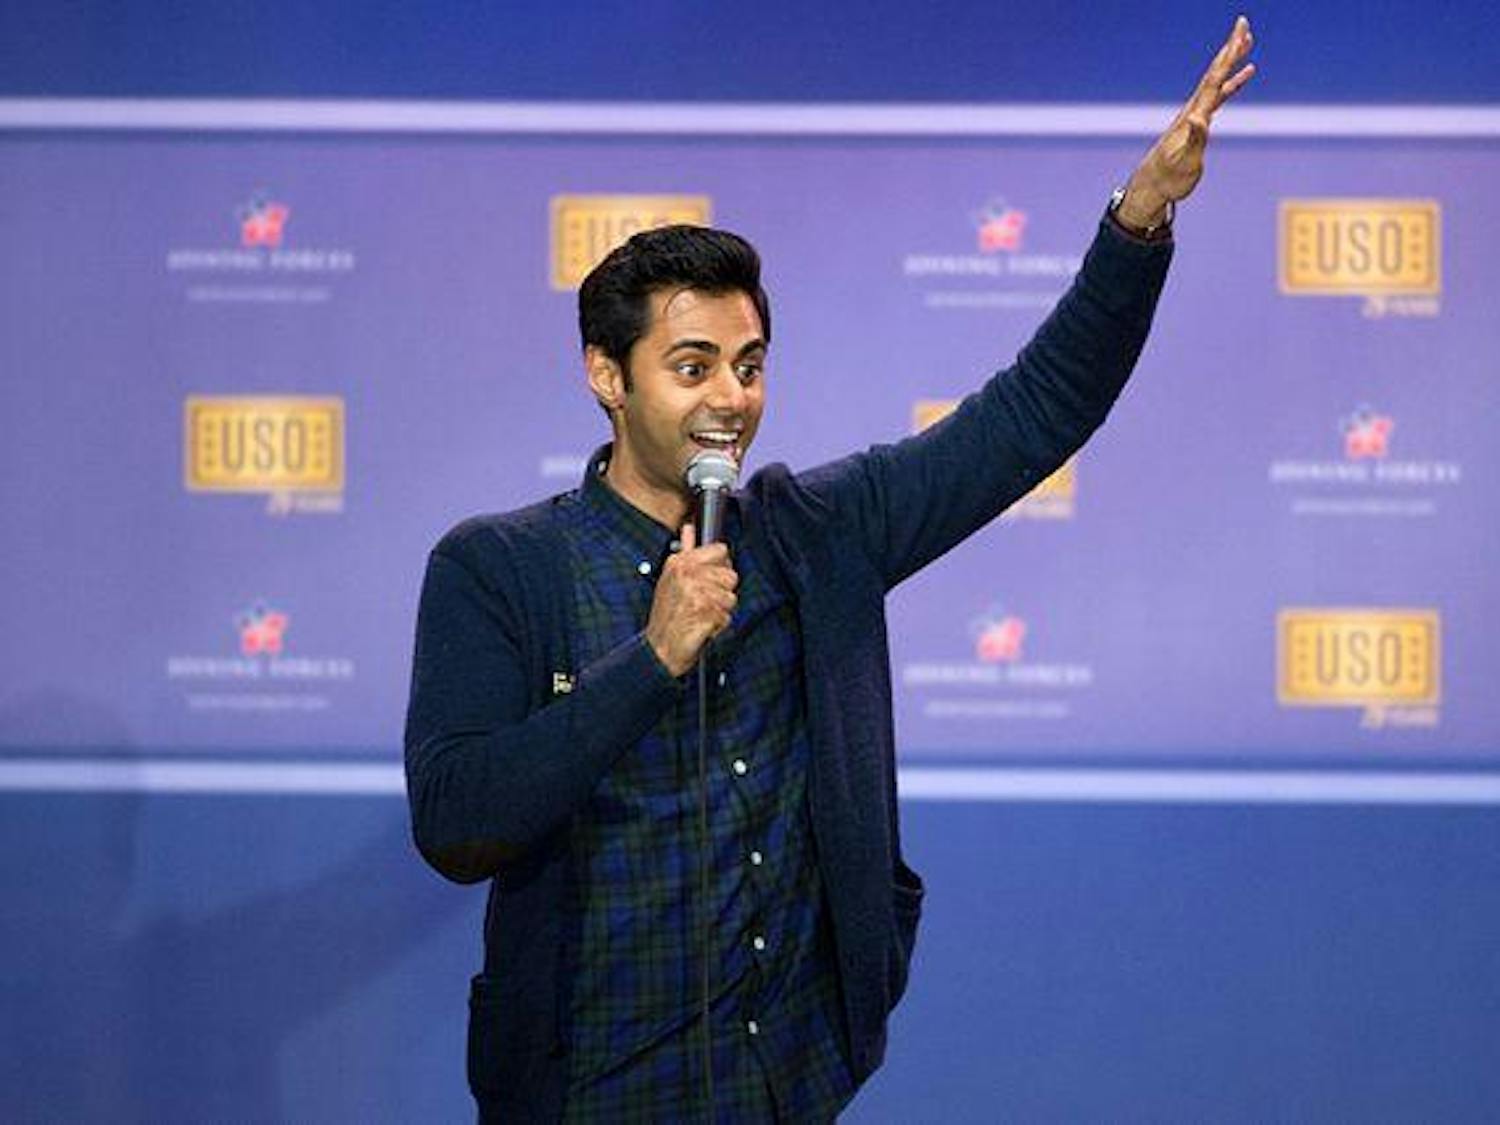 160505-D-DB155-010_Comedian_Hasan_Minhaj_performs_during_the_comedy_show_at_Joint_Base_Andrews_in_May_2016.jpg